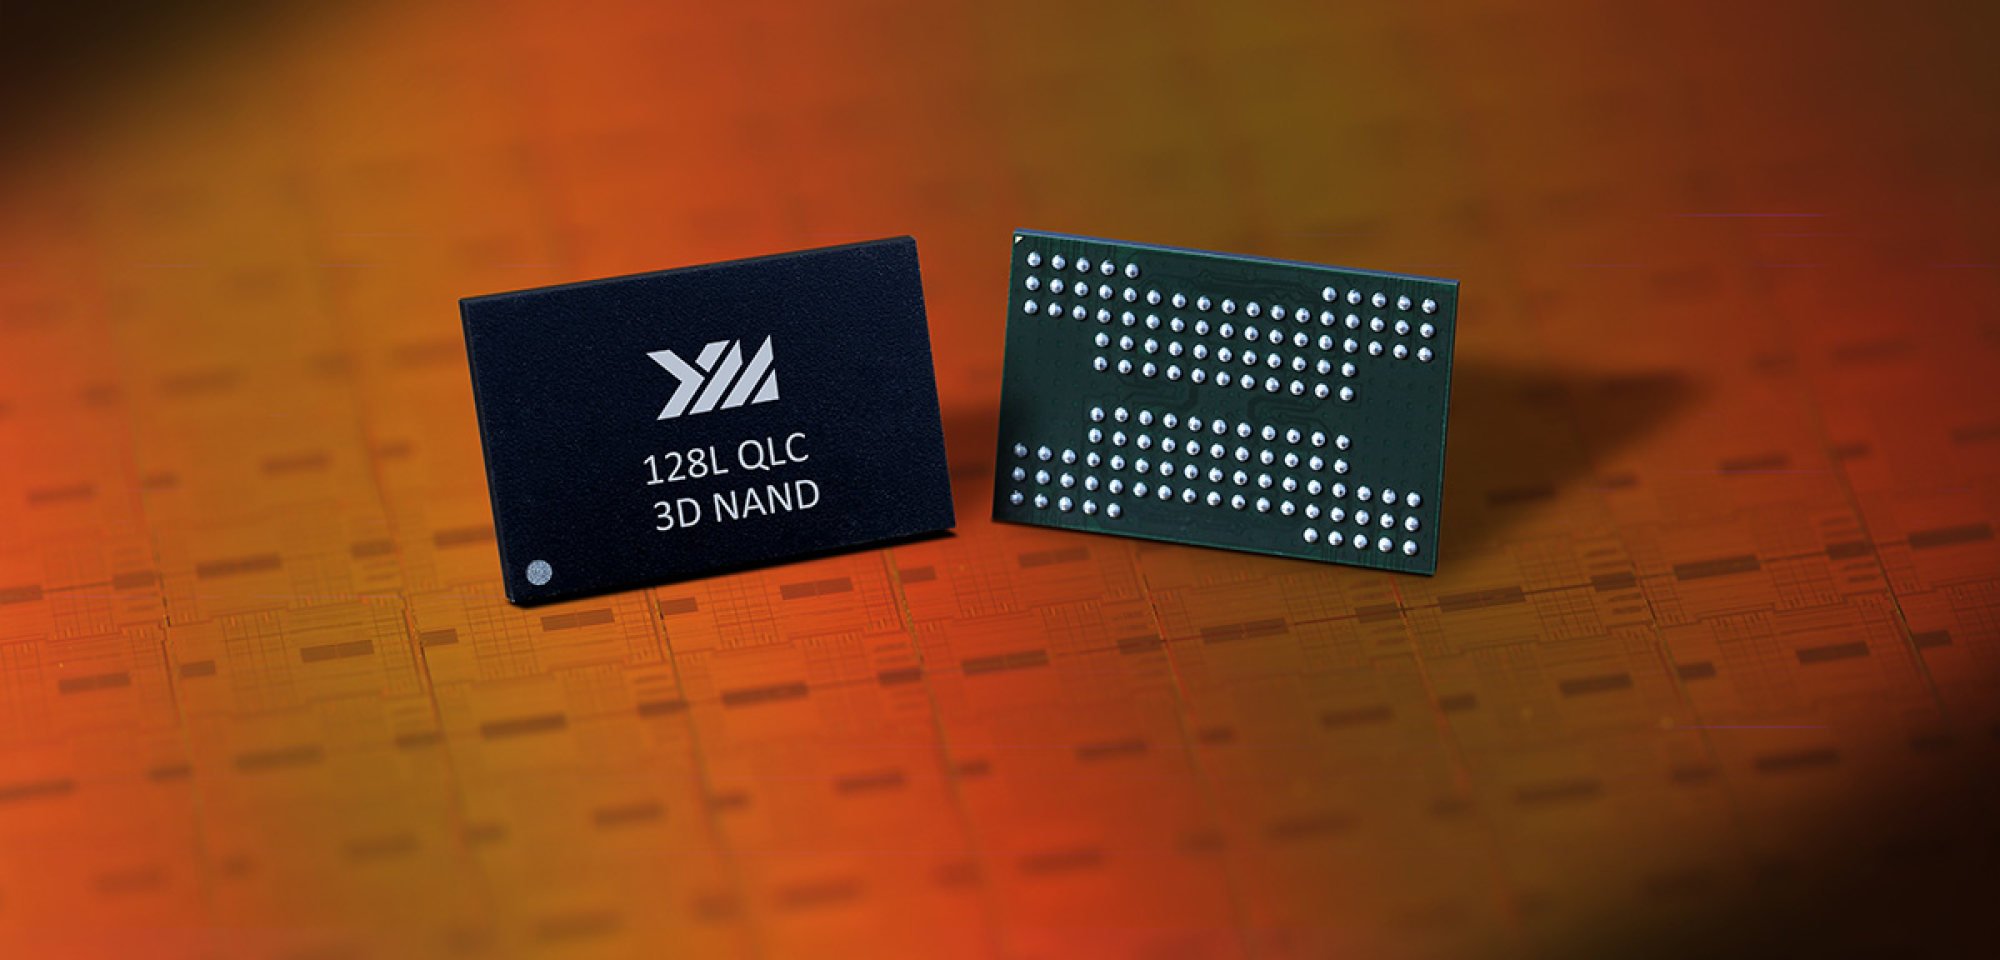 Samsung and SK Hynix could be spared harshest chip export restrictions in US-China tech war